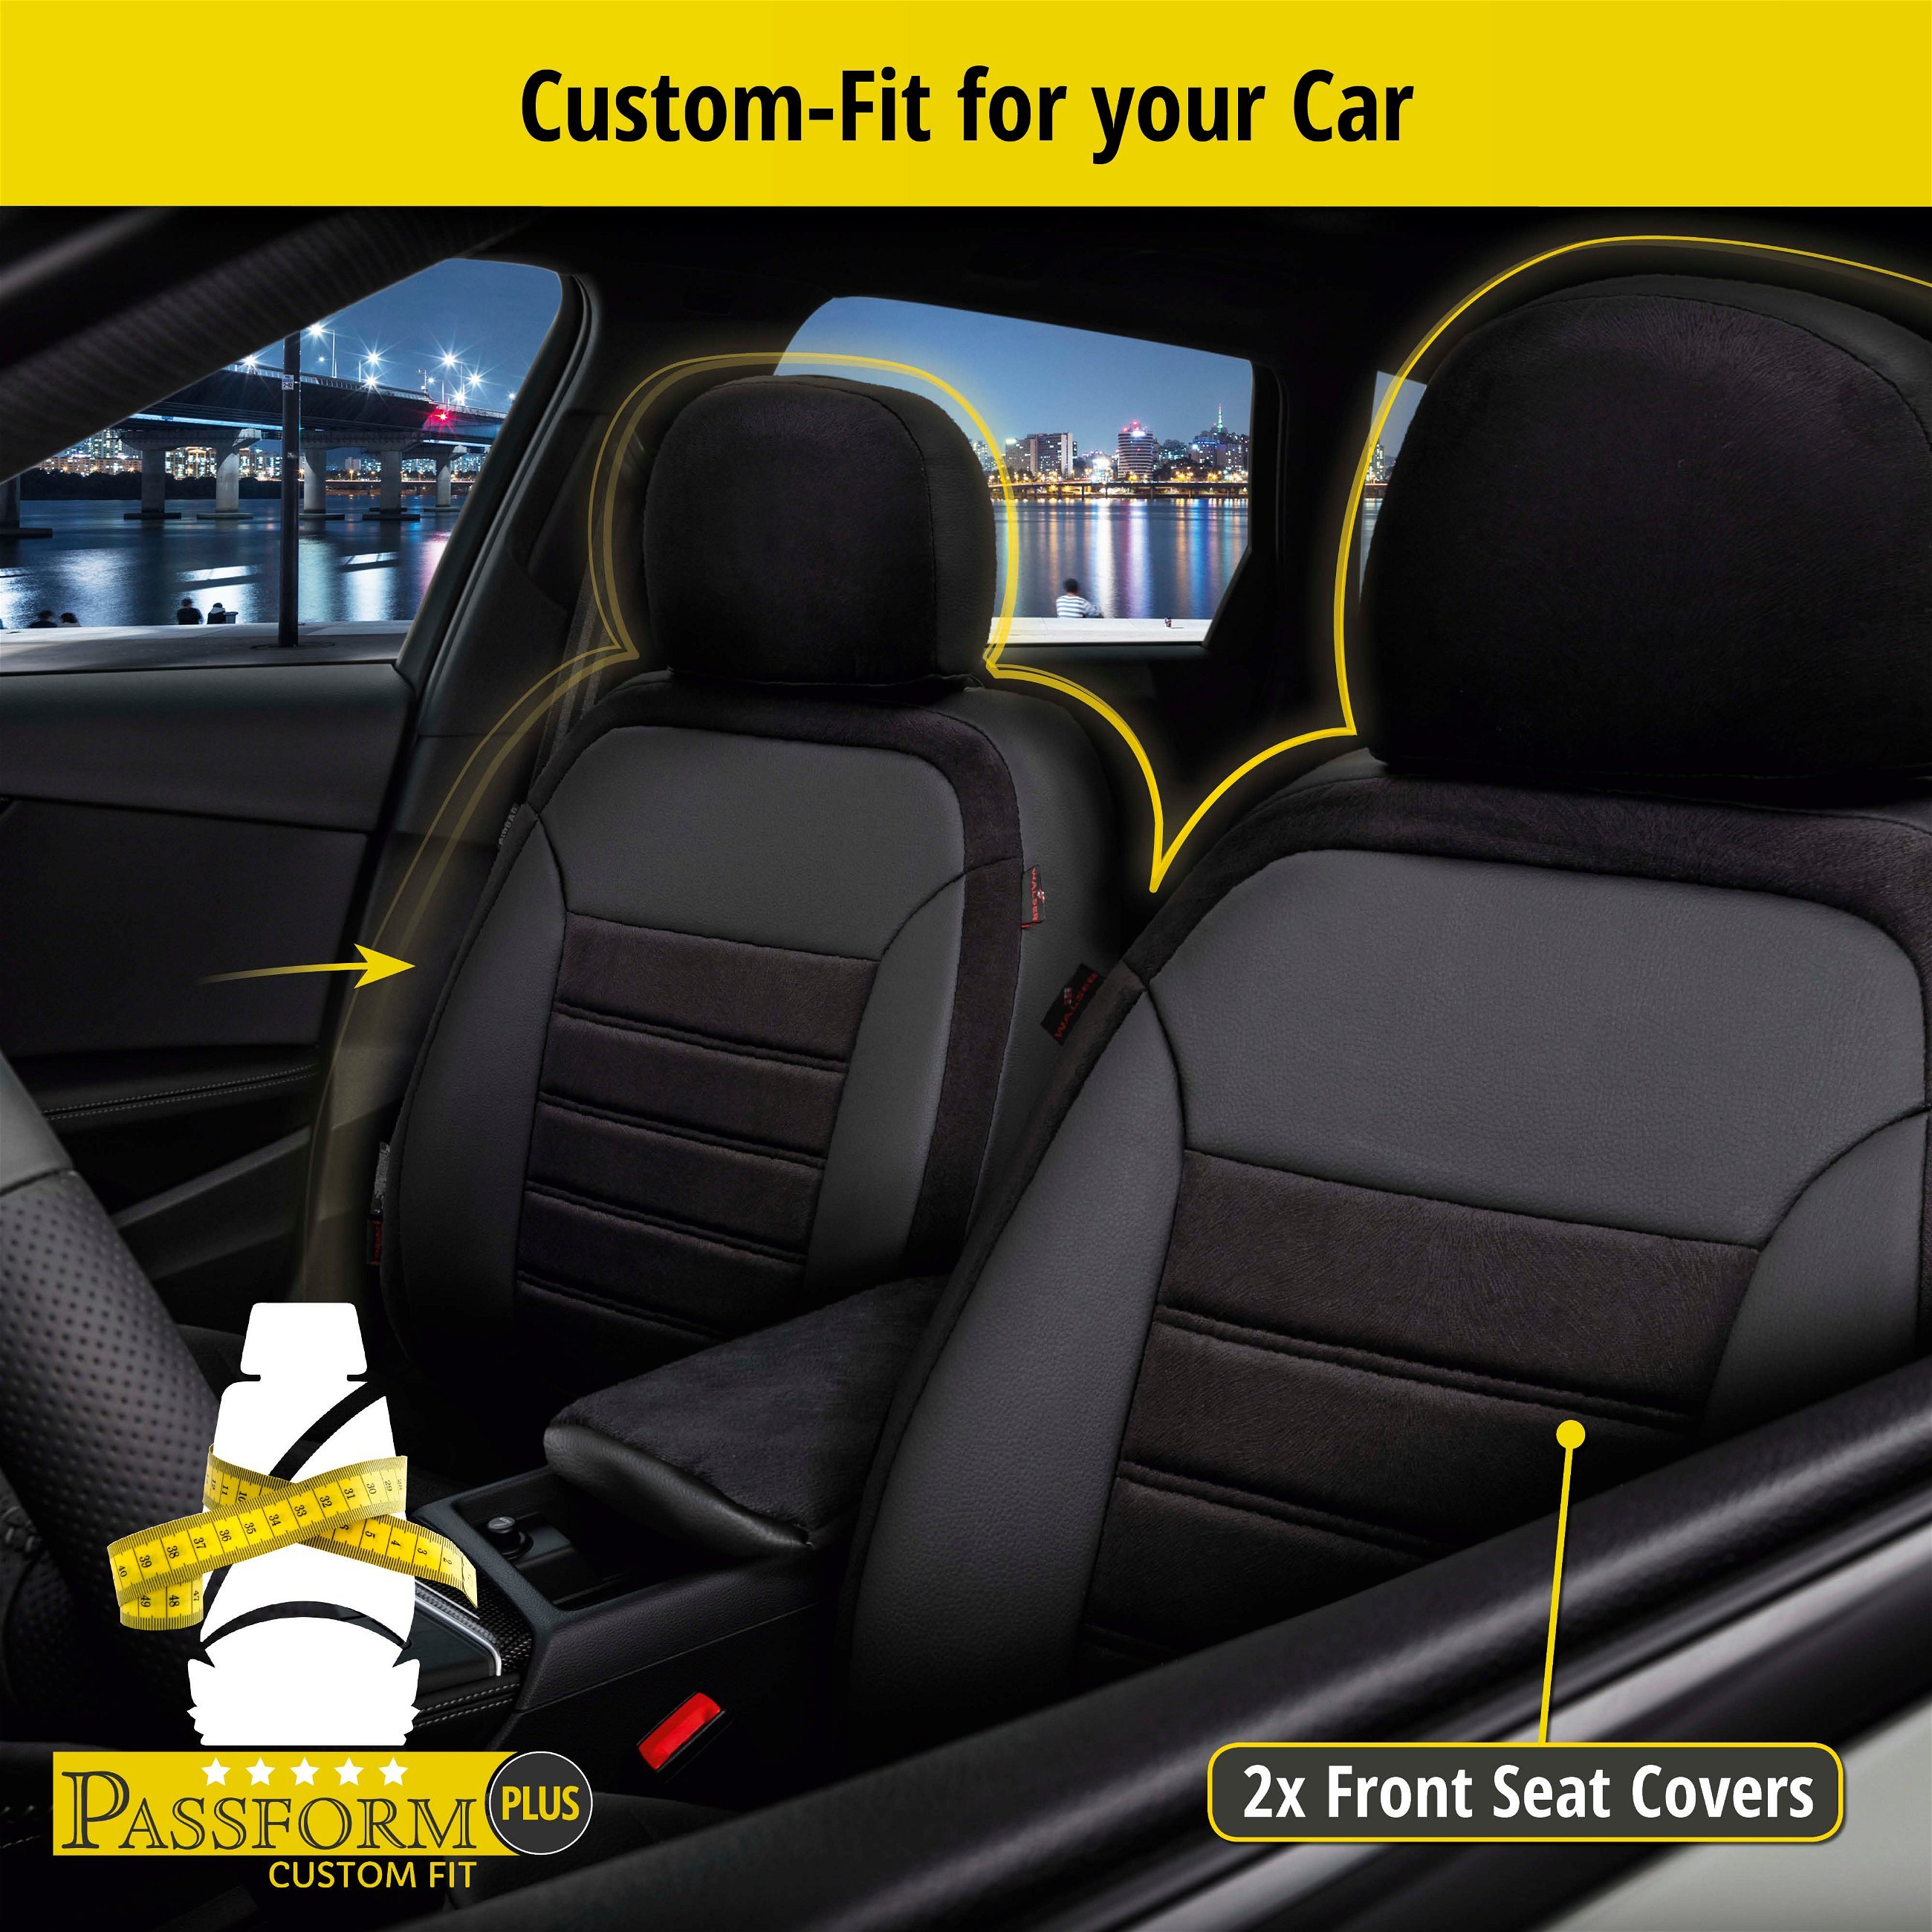 Seat Cover Bari for VW Caddy III Combi 2KB,2KJ,2CB 03/2004-05/2015, 2 seat covers for normal seats